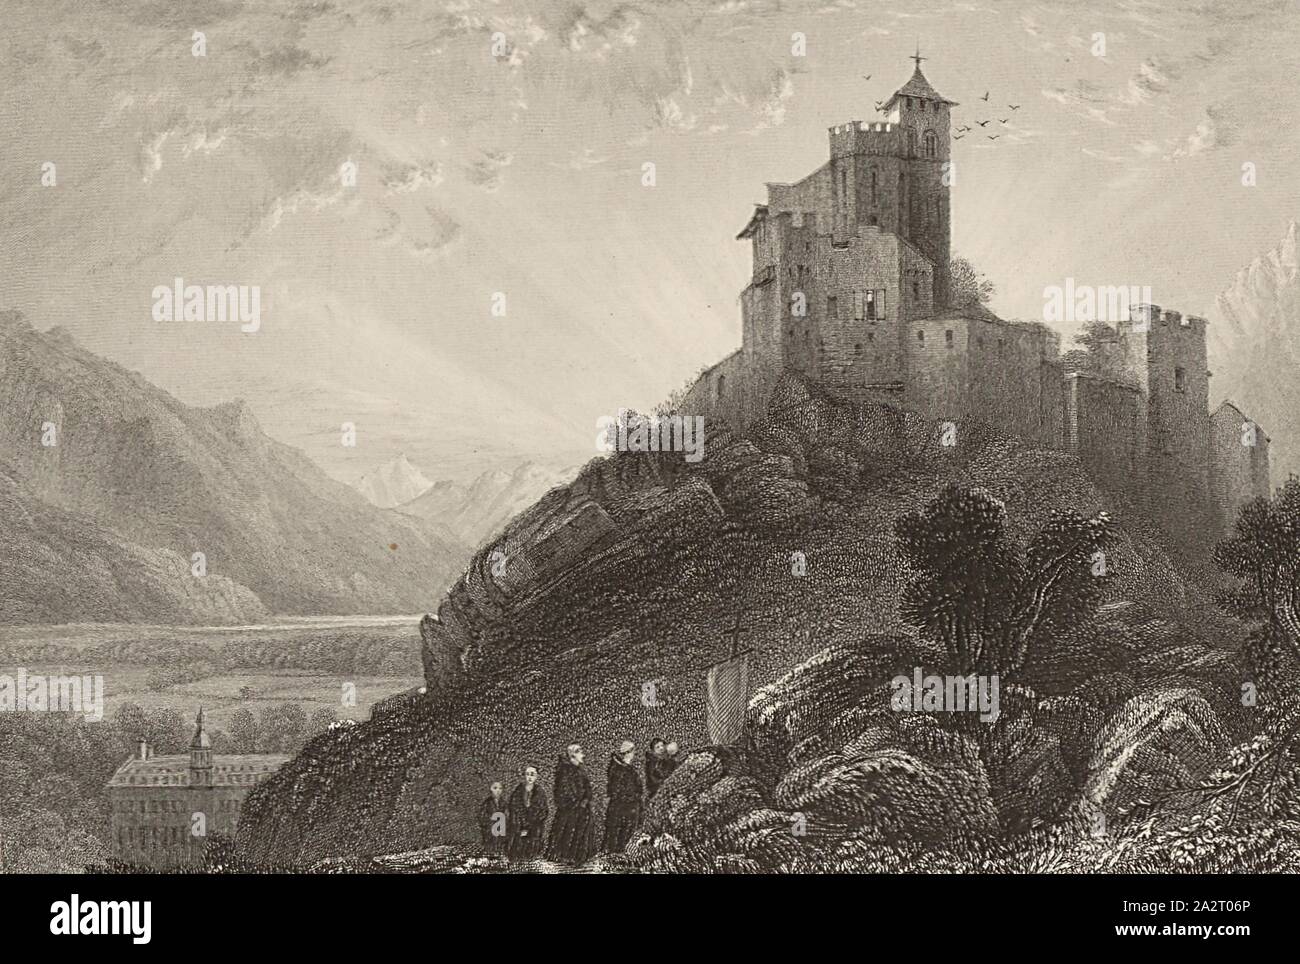 Cathedral of Sion, Valais, View of the castle (or church) Valère in Sion, signed: W.H. Bartlett, T. Creswick, W. Taylor, pl. 22, to p. 50 (vol. 1), Bartlett, William Henry; Creswick T.; Taylor, W., 1835, William Beattie, Switzerland. London: Virtue, 1836 Stock Photo